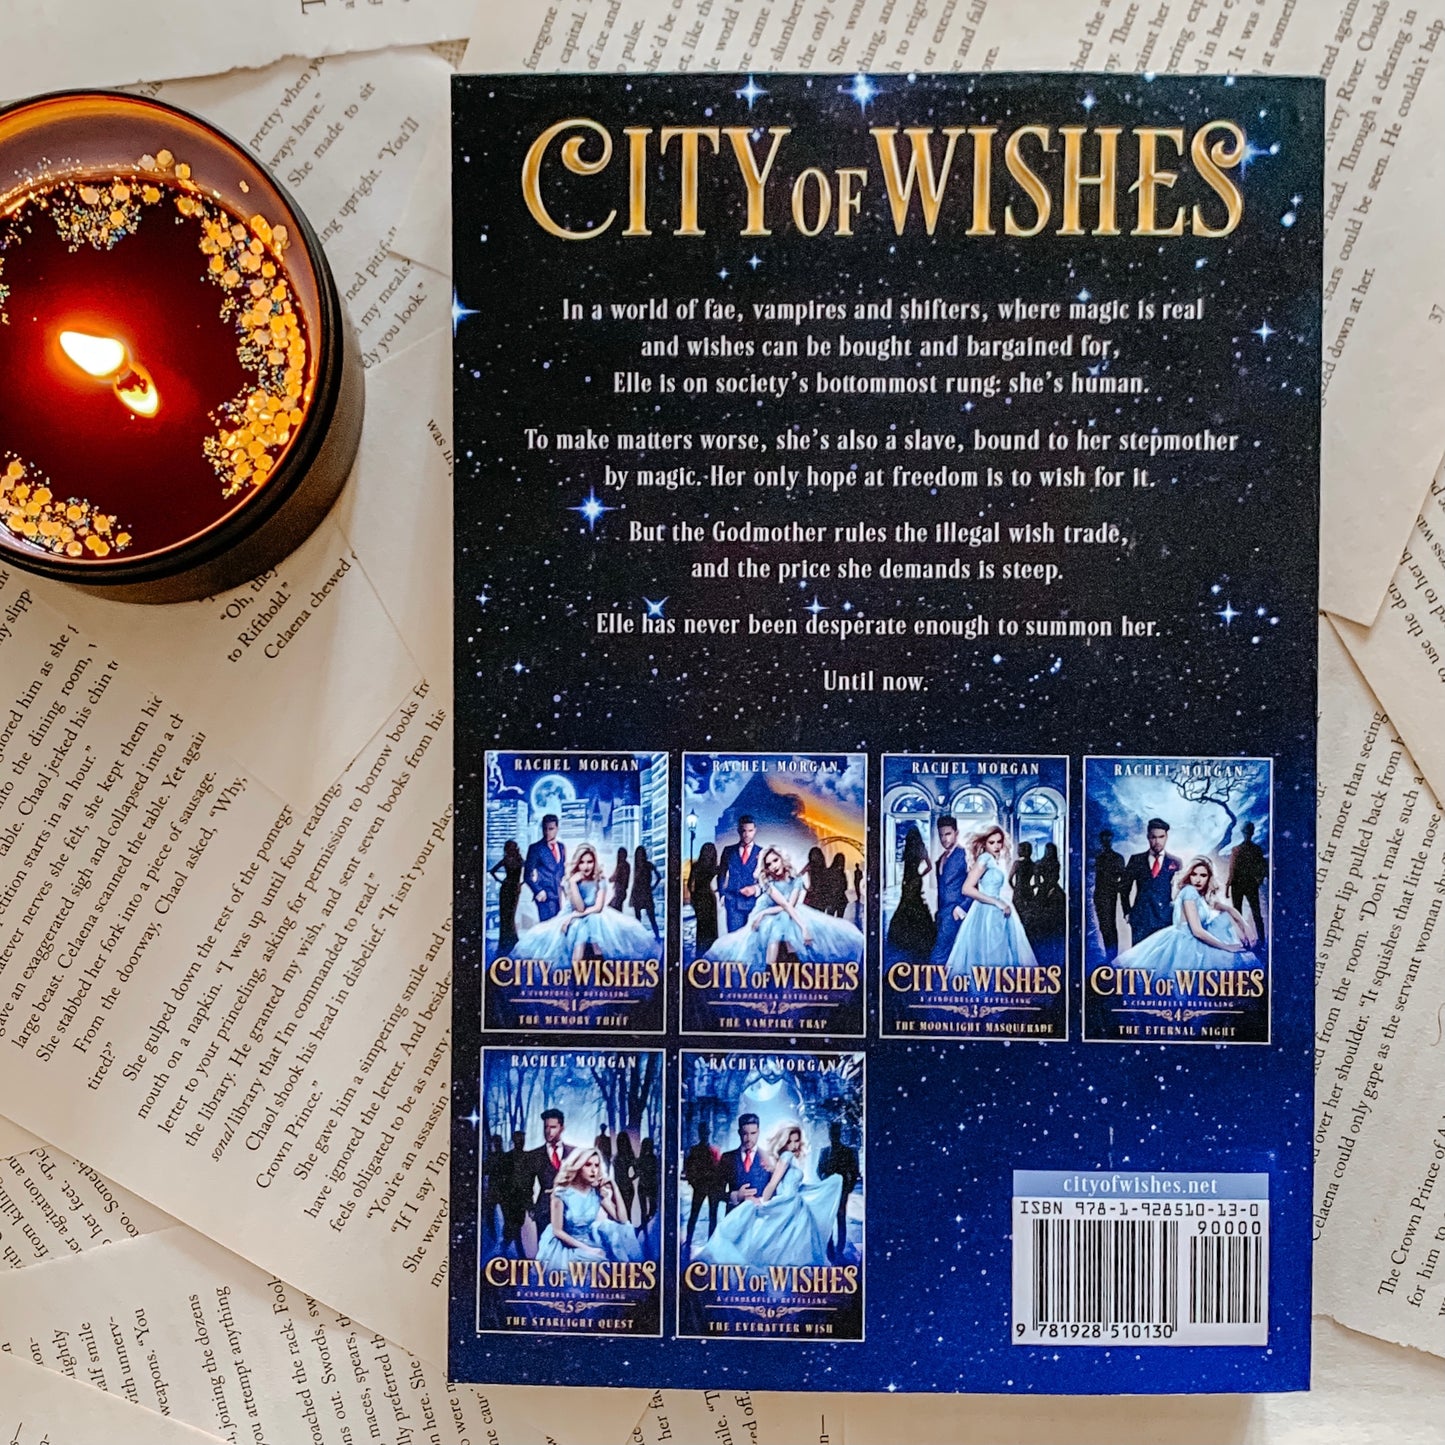 City of Wishes by Rachel Morgan